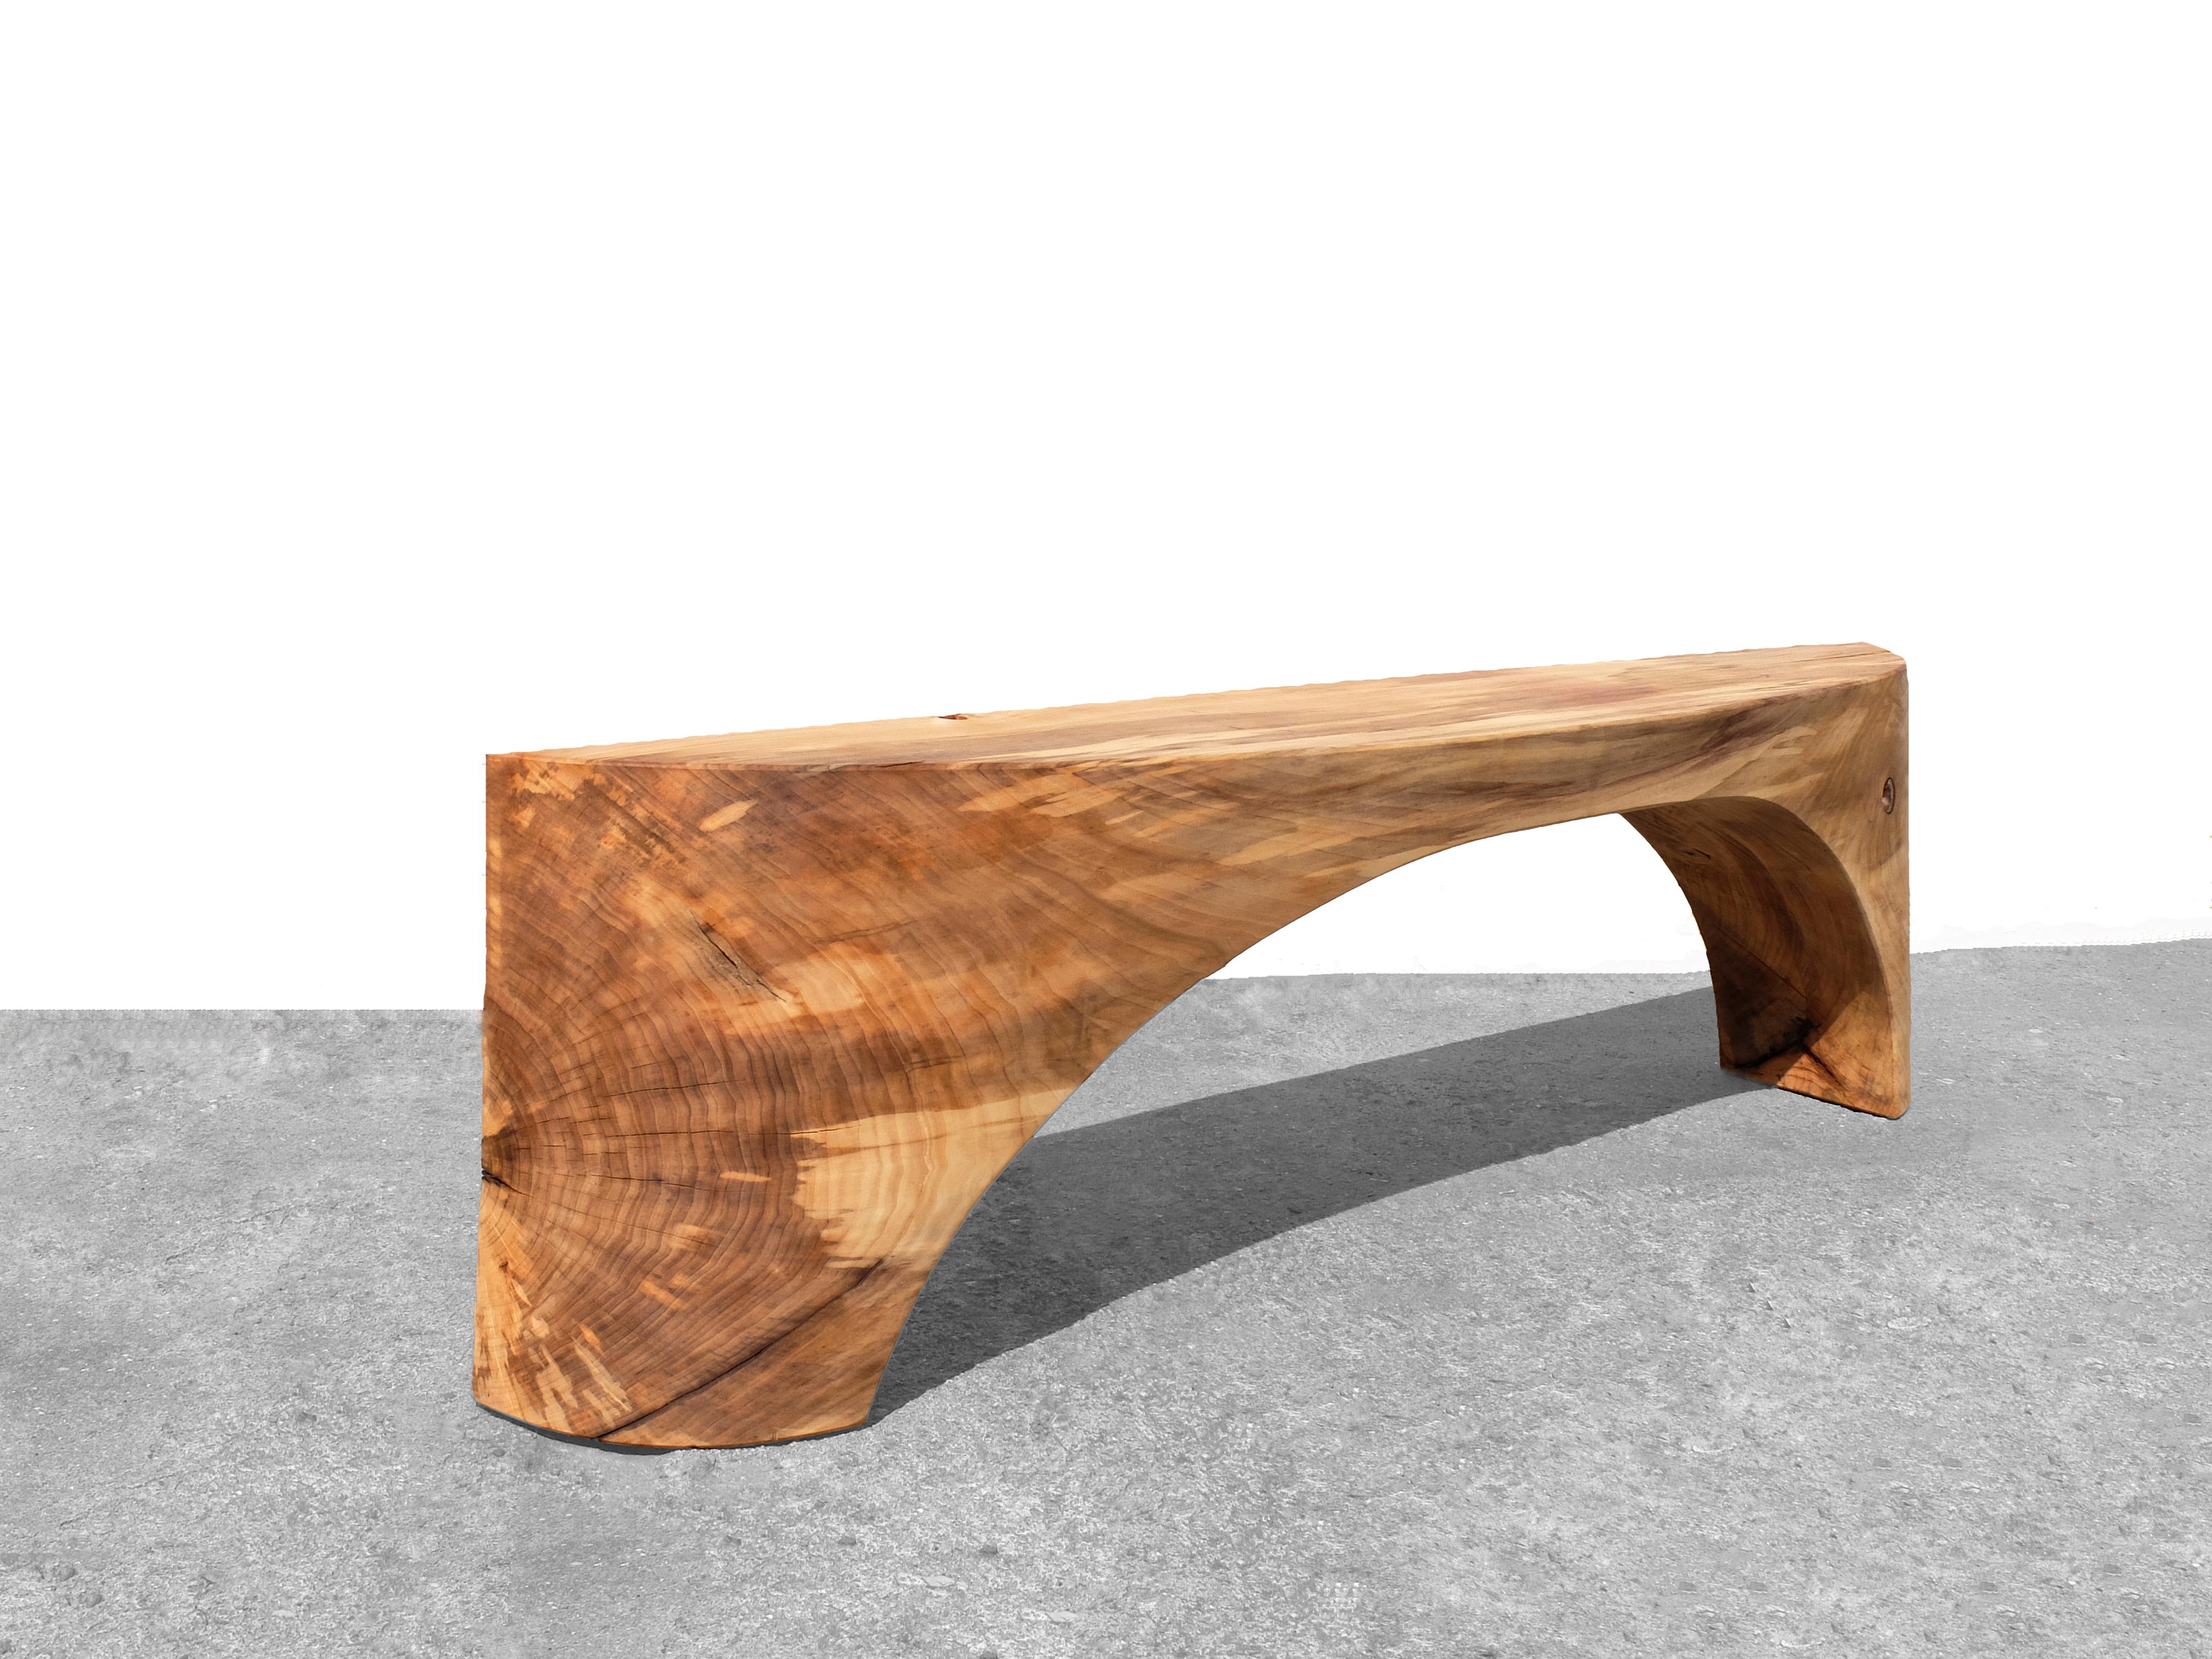 Unique Poplar bench sculpted by Jörg Pietschmann
Materials: Polished poplar, oil finish
Dimensions: H 59 x W 207 x D 33 cm

In Pietschmann’s sculptures, trees that for centuries were part of a landscape and founded in primordial forces tell